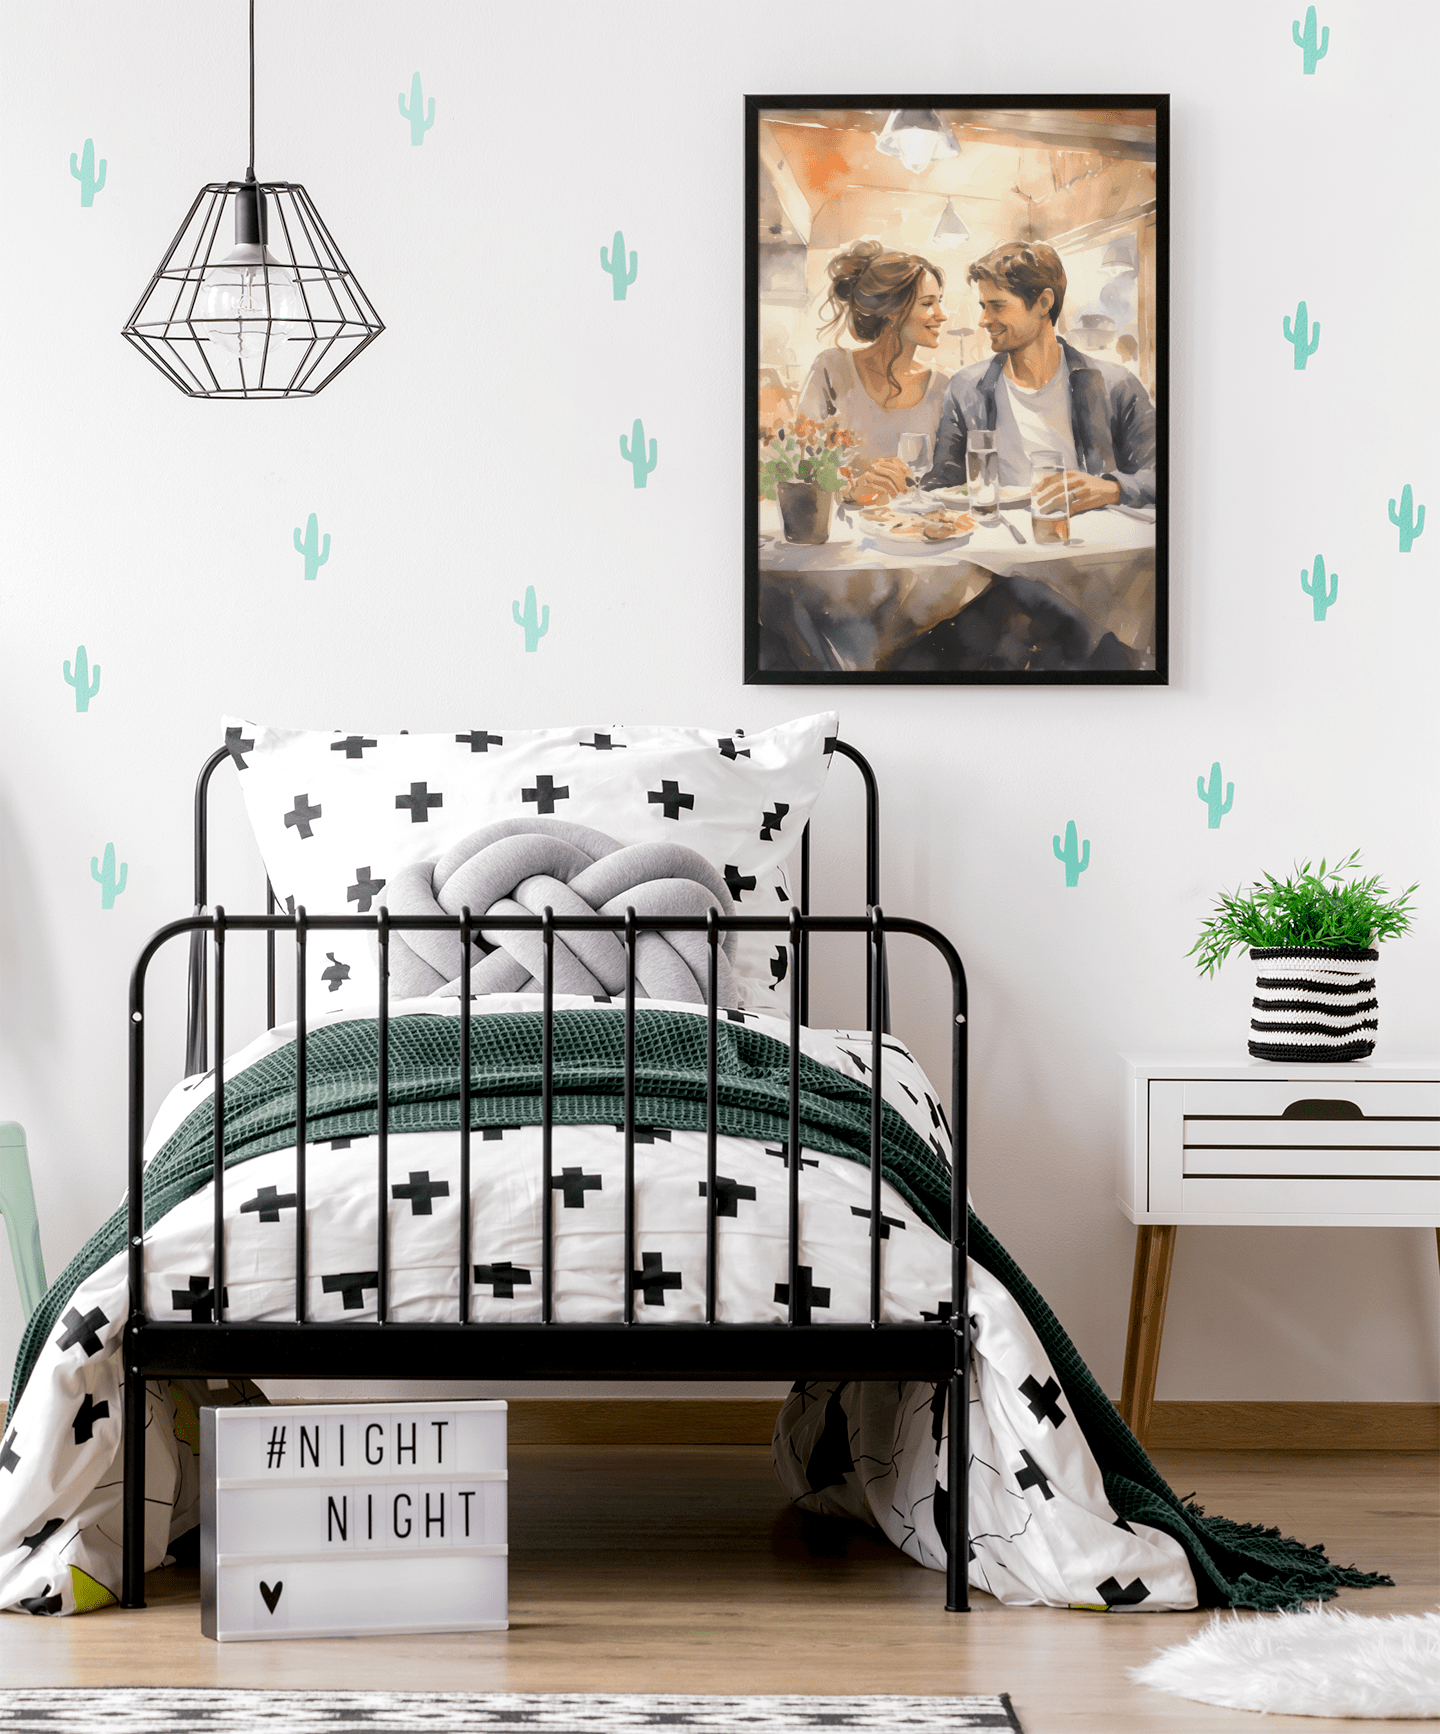 This captivating watercolor canvas showcases a young couple, deeply in love, sharing an intimate meal at a cozy restaurant. The soft, romantic hues highlight their comfort and contentment, creating a tender atmosphereIn situ on bedroom wall. It's a heartfelt portrayal of romance.